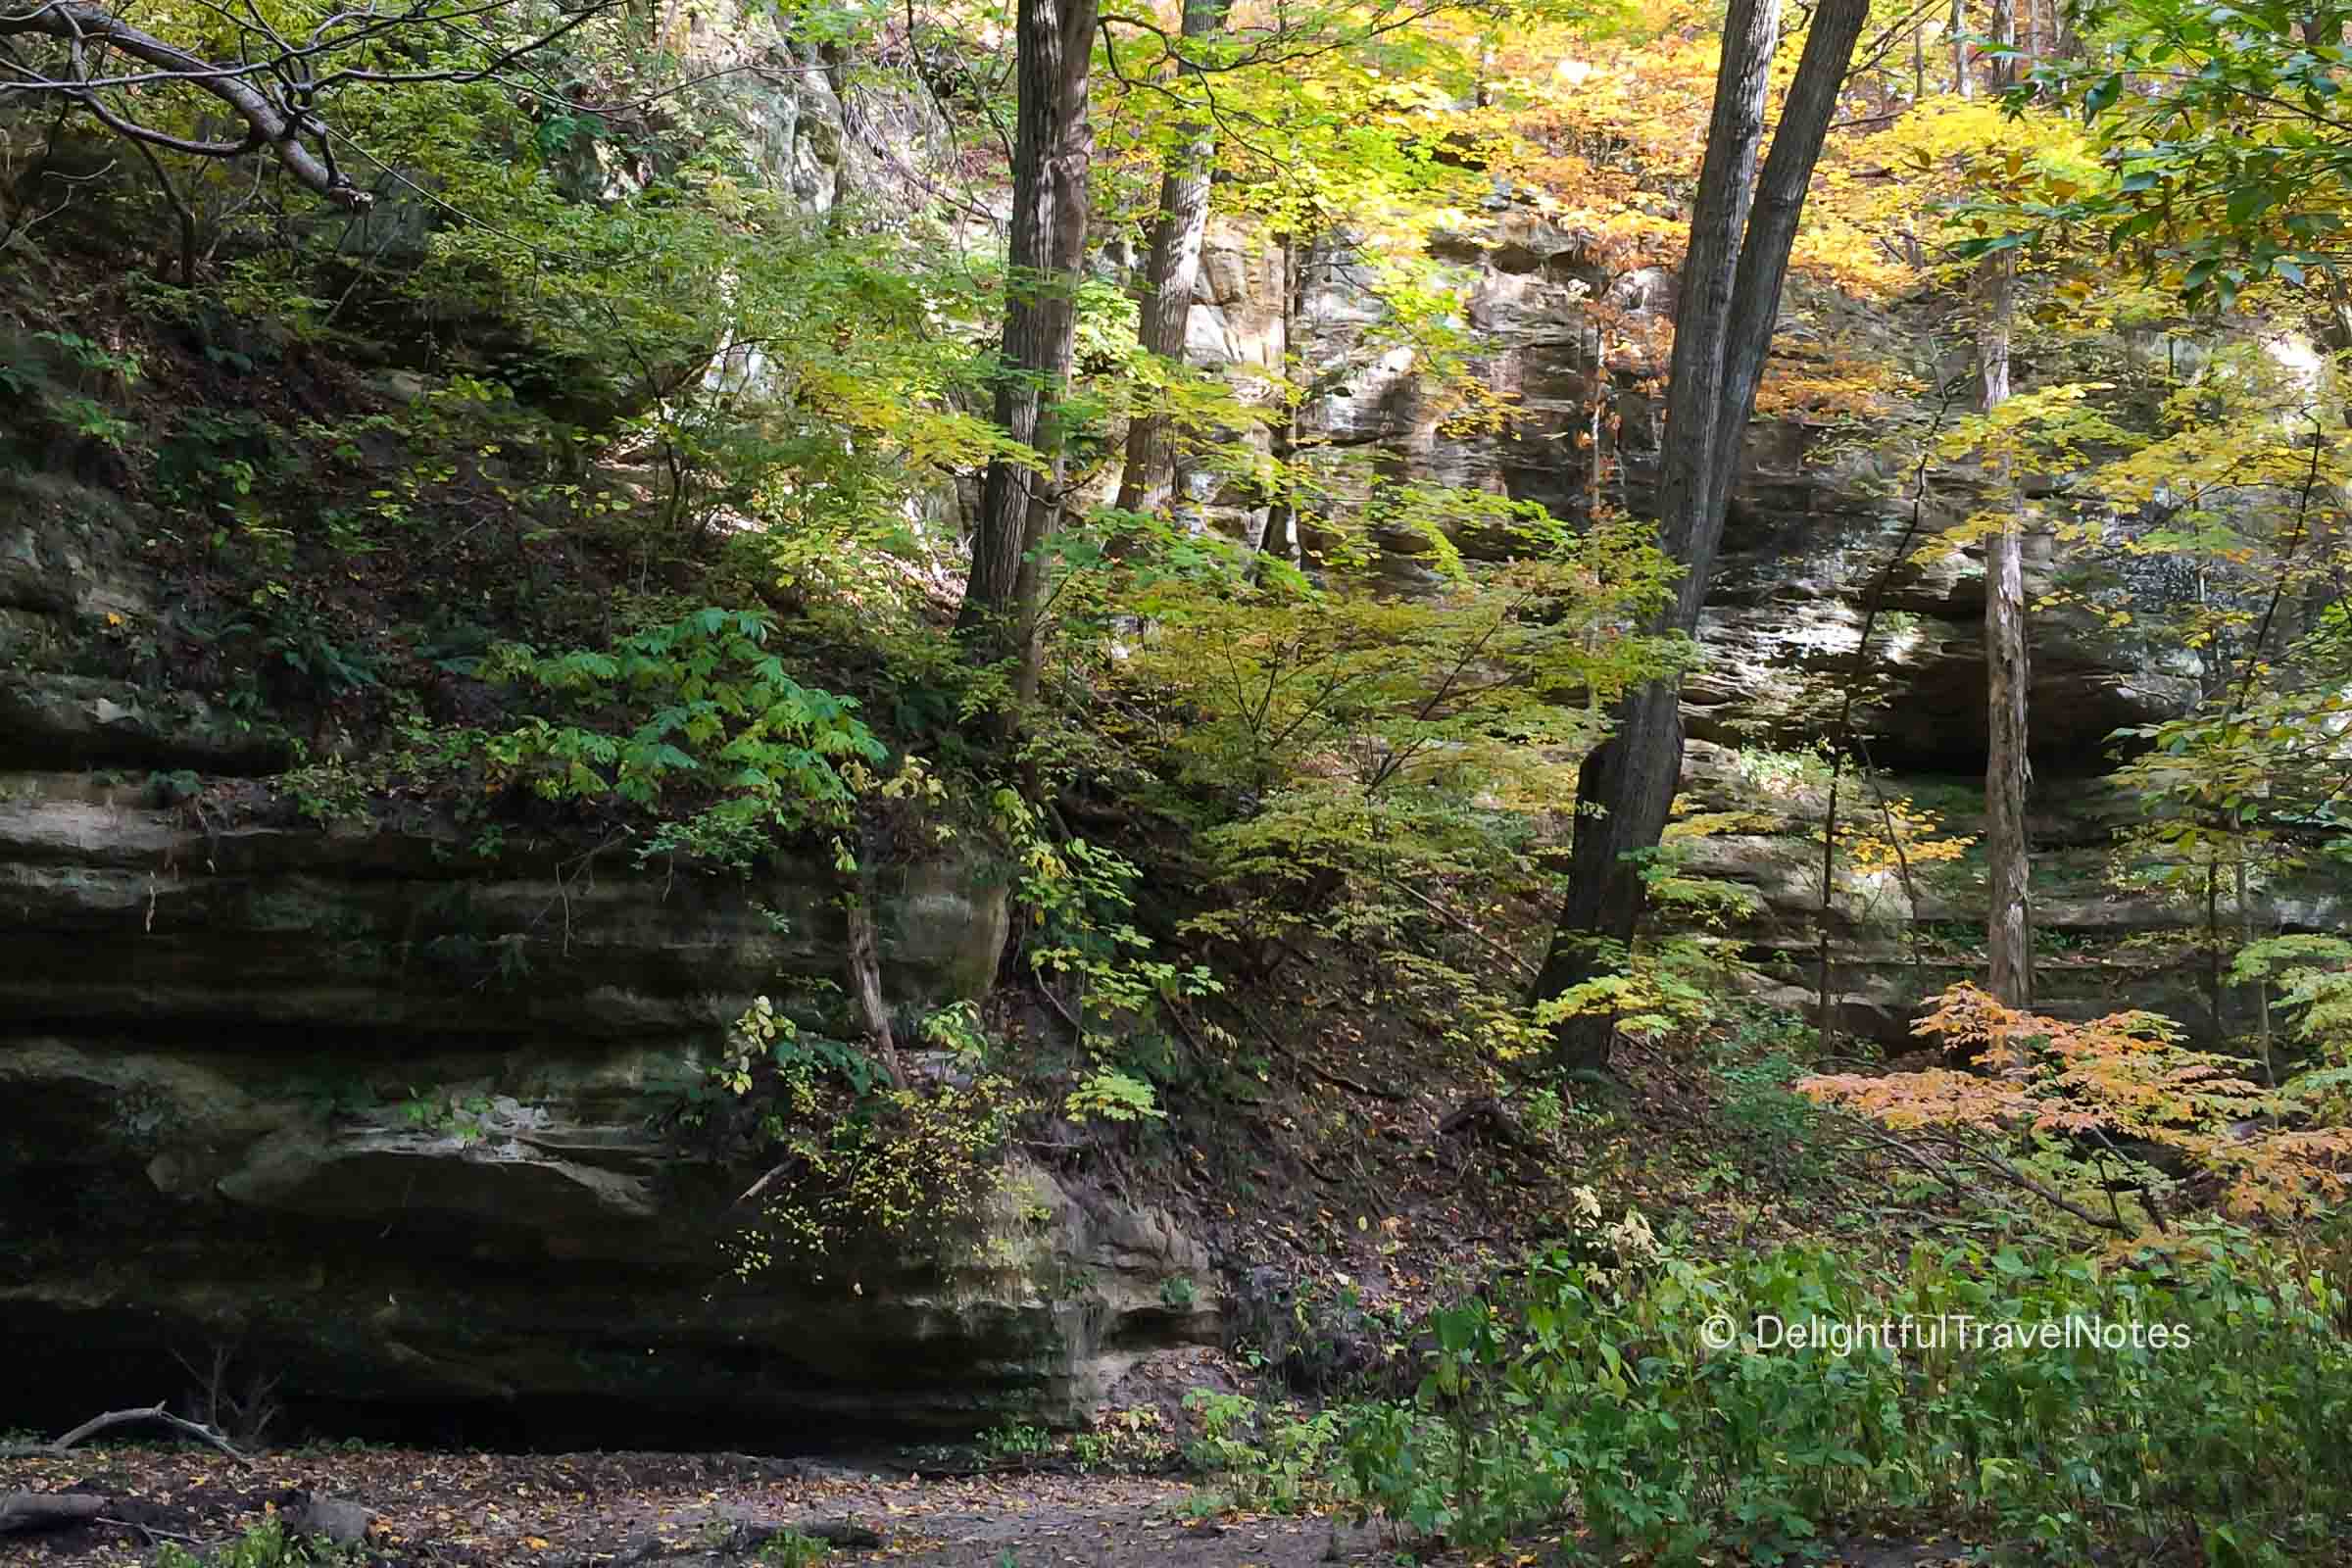 view of trees and rock formations at Starved Rock State Park, a road trip destination in Illinois.